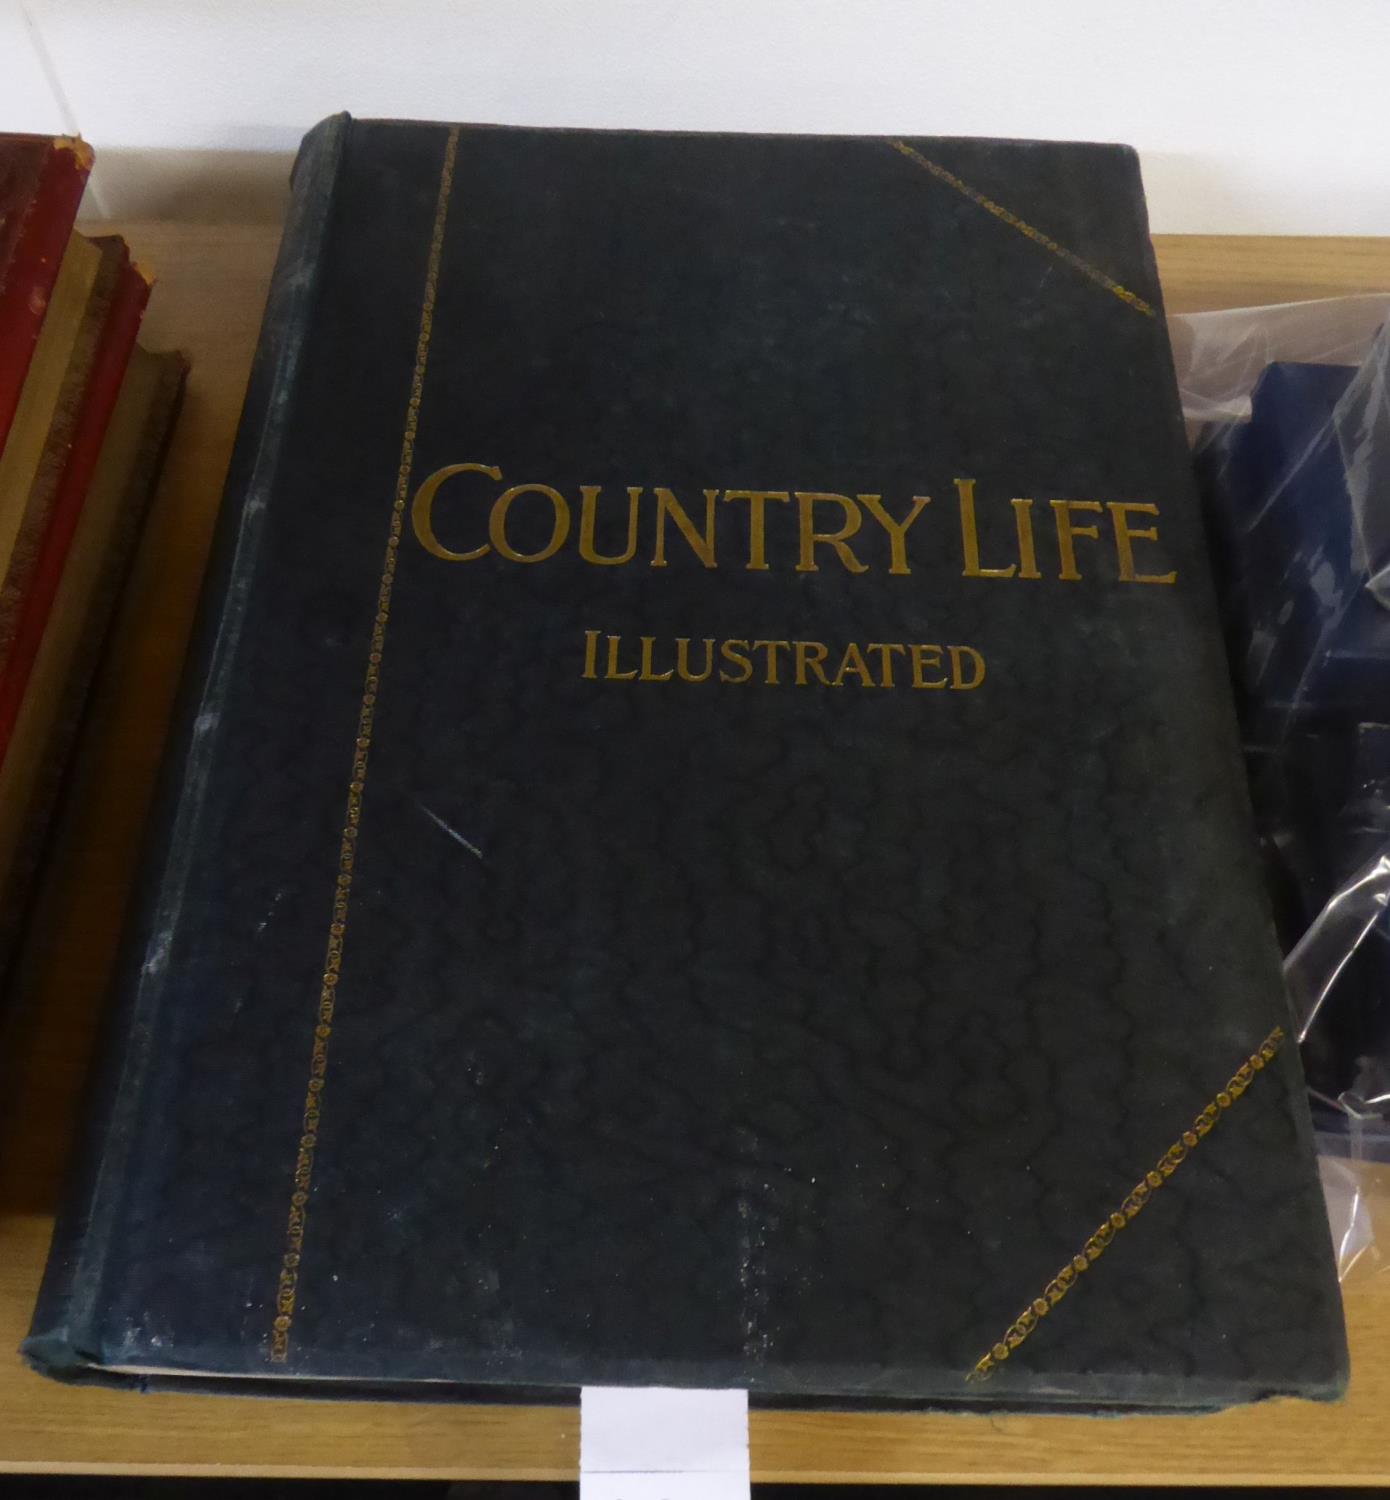 COUNTRY LIFE ILLUSTRATED magazine, The Journal for all interested in Country Life and Country